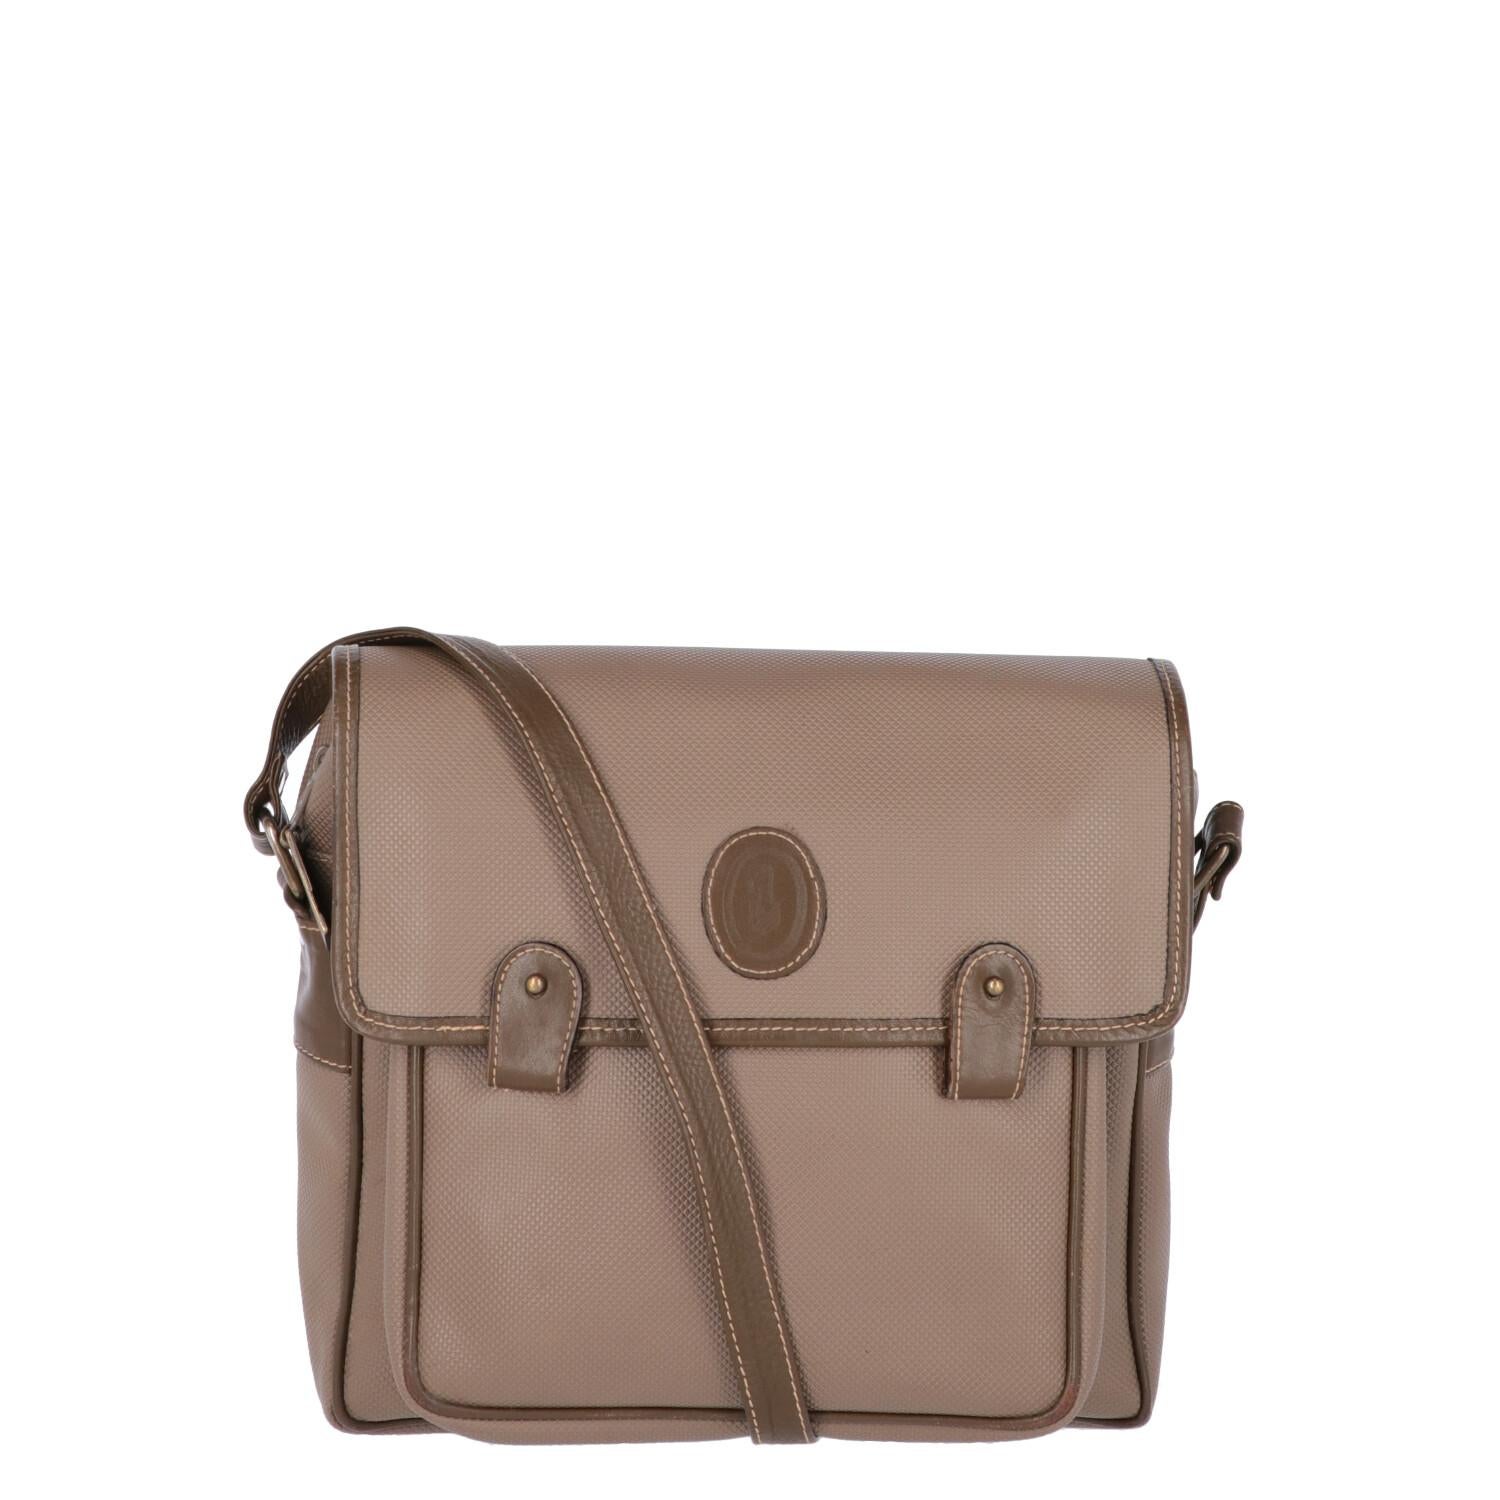 Le-Solim dove-gray plastic postman style bag with edges finished in brown leather. Model with adjustable shoulder strap, zip pocket and patch pocket, front flap with interlocking buttons.

The product shows slight signs of wear on the edges as shown